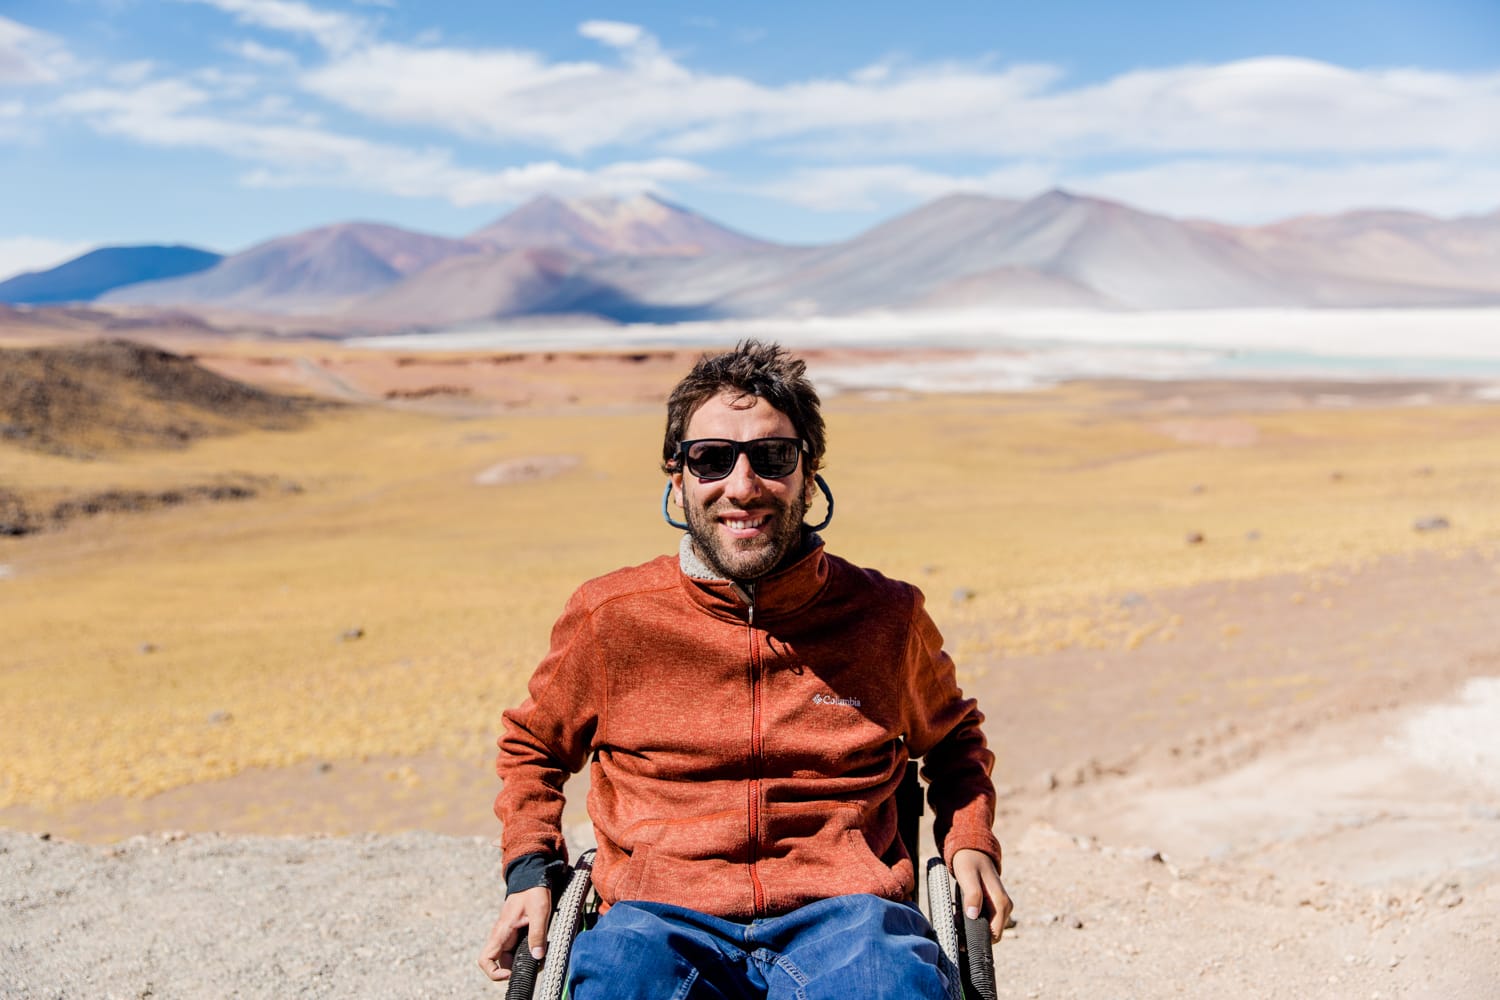 Alvaro Silberstein is the founder of Wheel the World - an accessible travel company for those with disabilities.